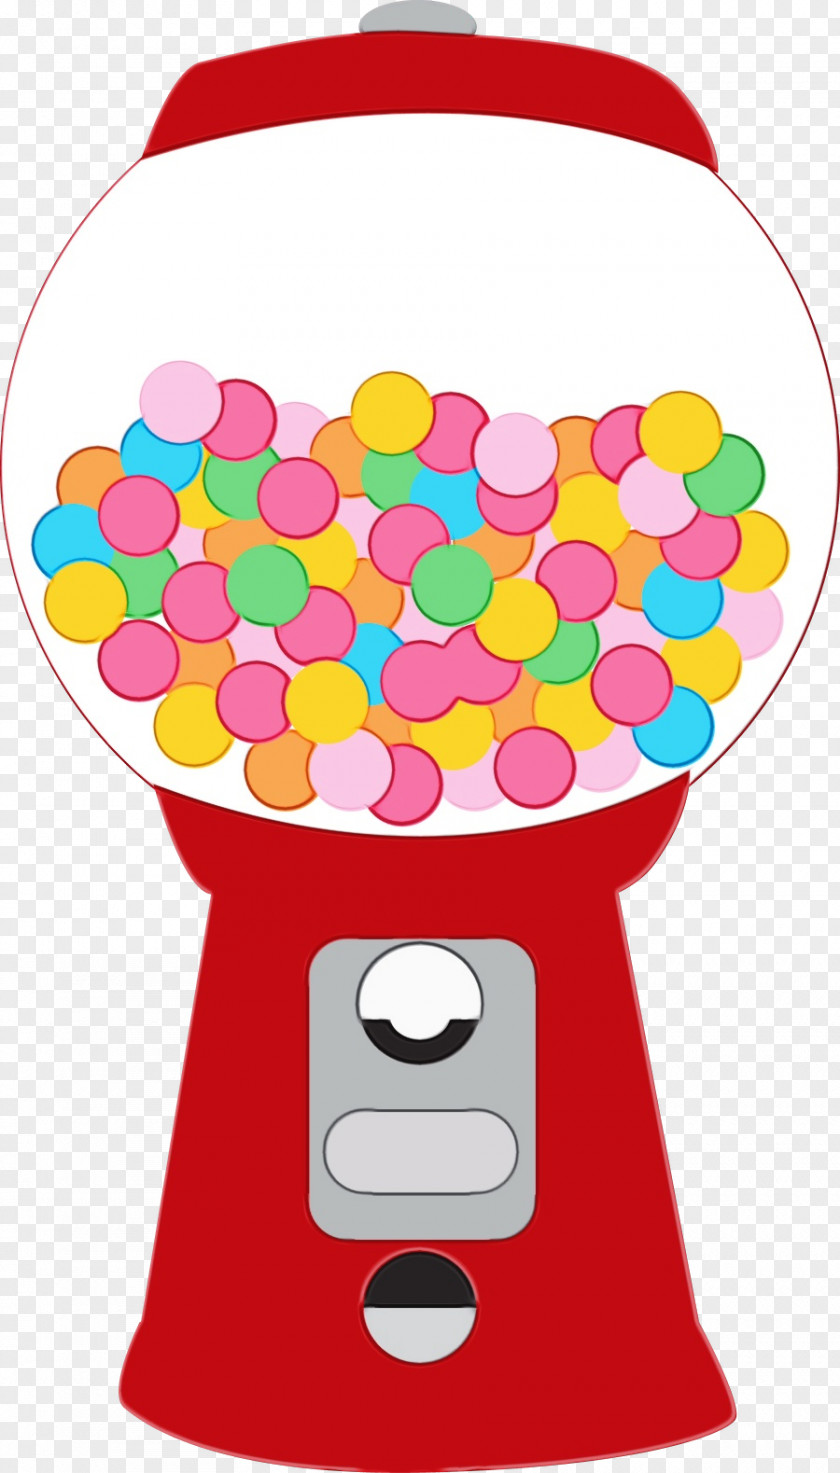 Gumball Machine Chewing Gum Bubble Candy Fruit Machines PNG